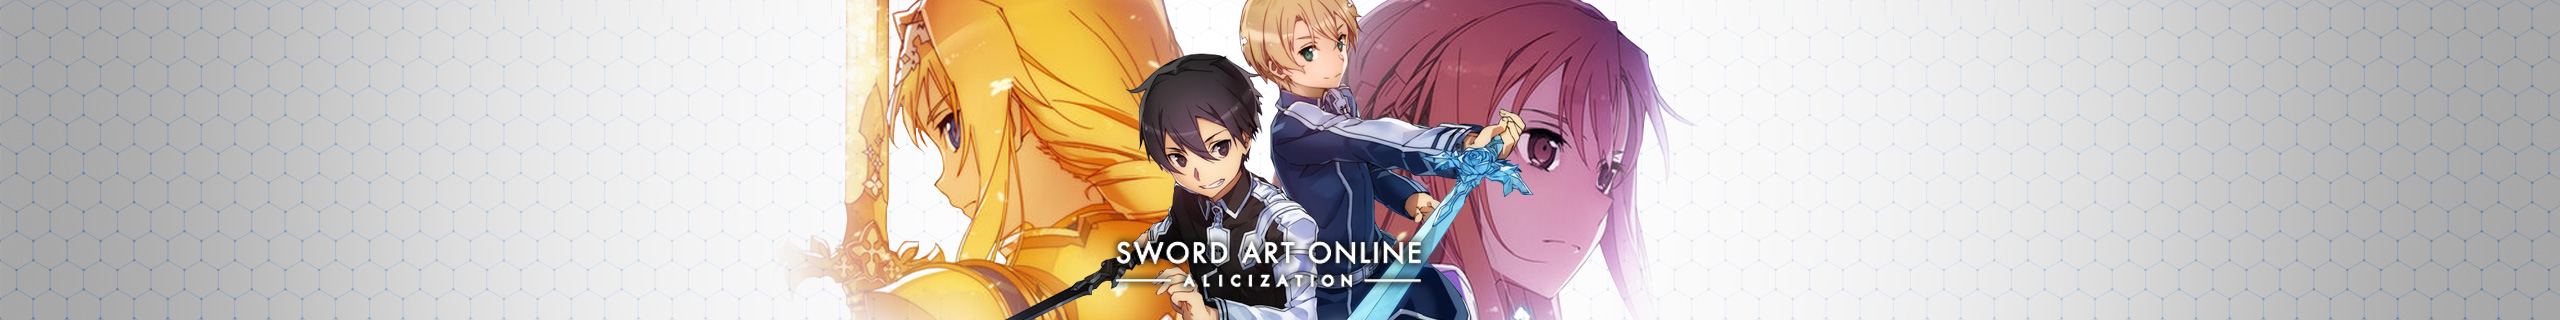 Sword Art Online: Alicization Picture by Raugintas